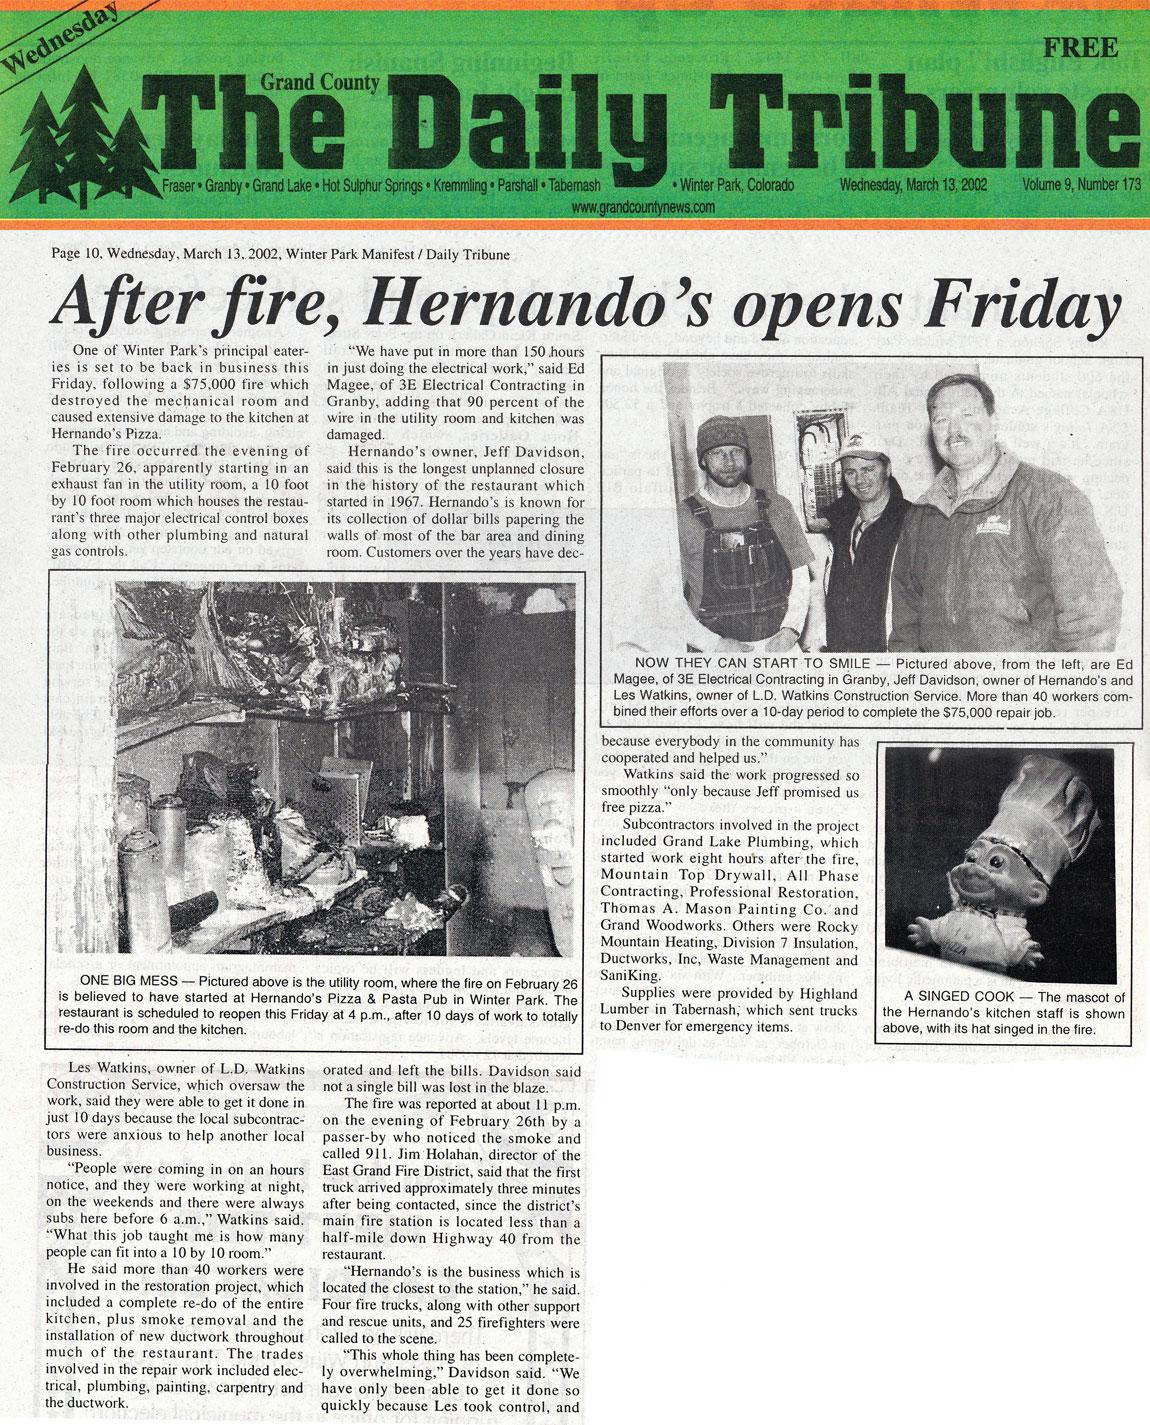 Hernandos Fire in 2002 reconstruction by LD Watkins